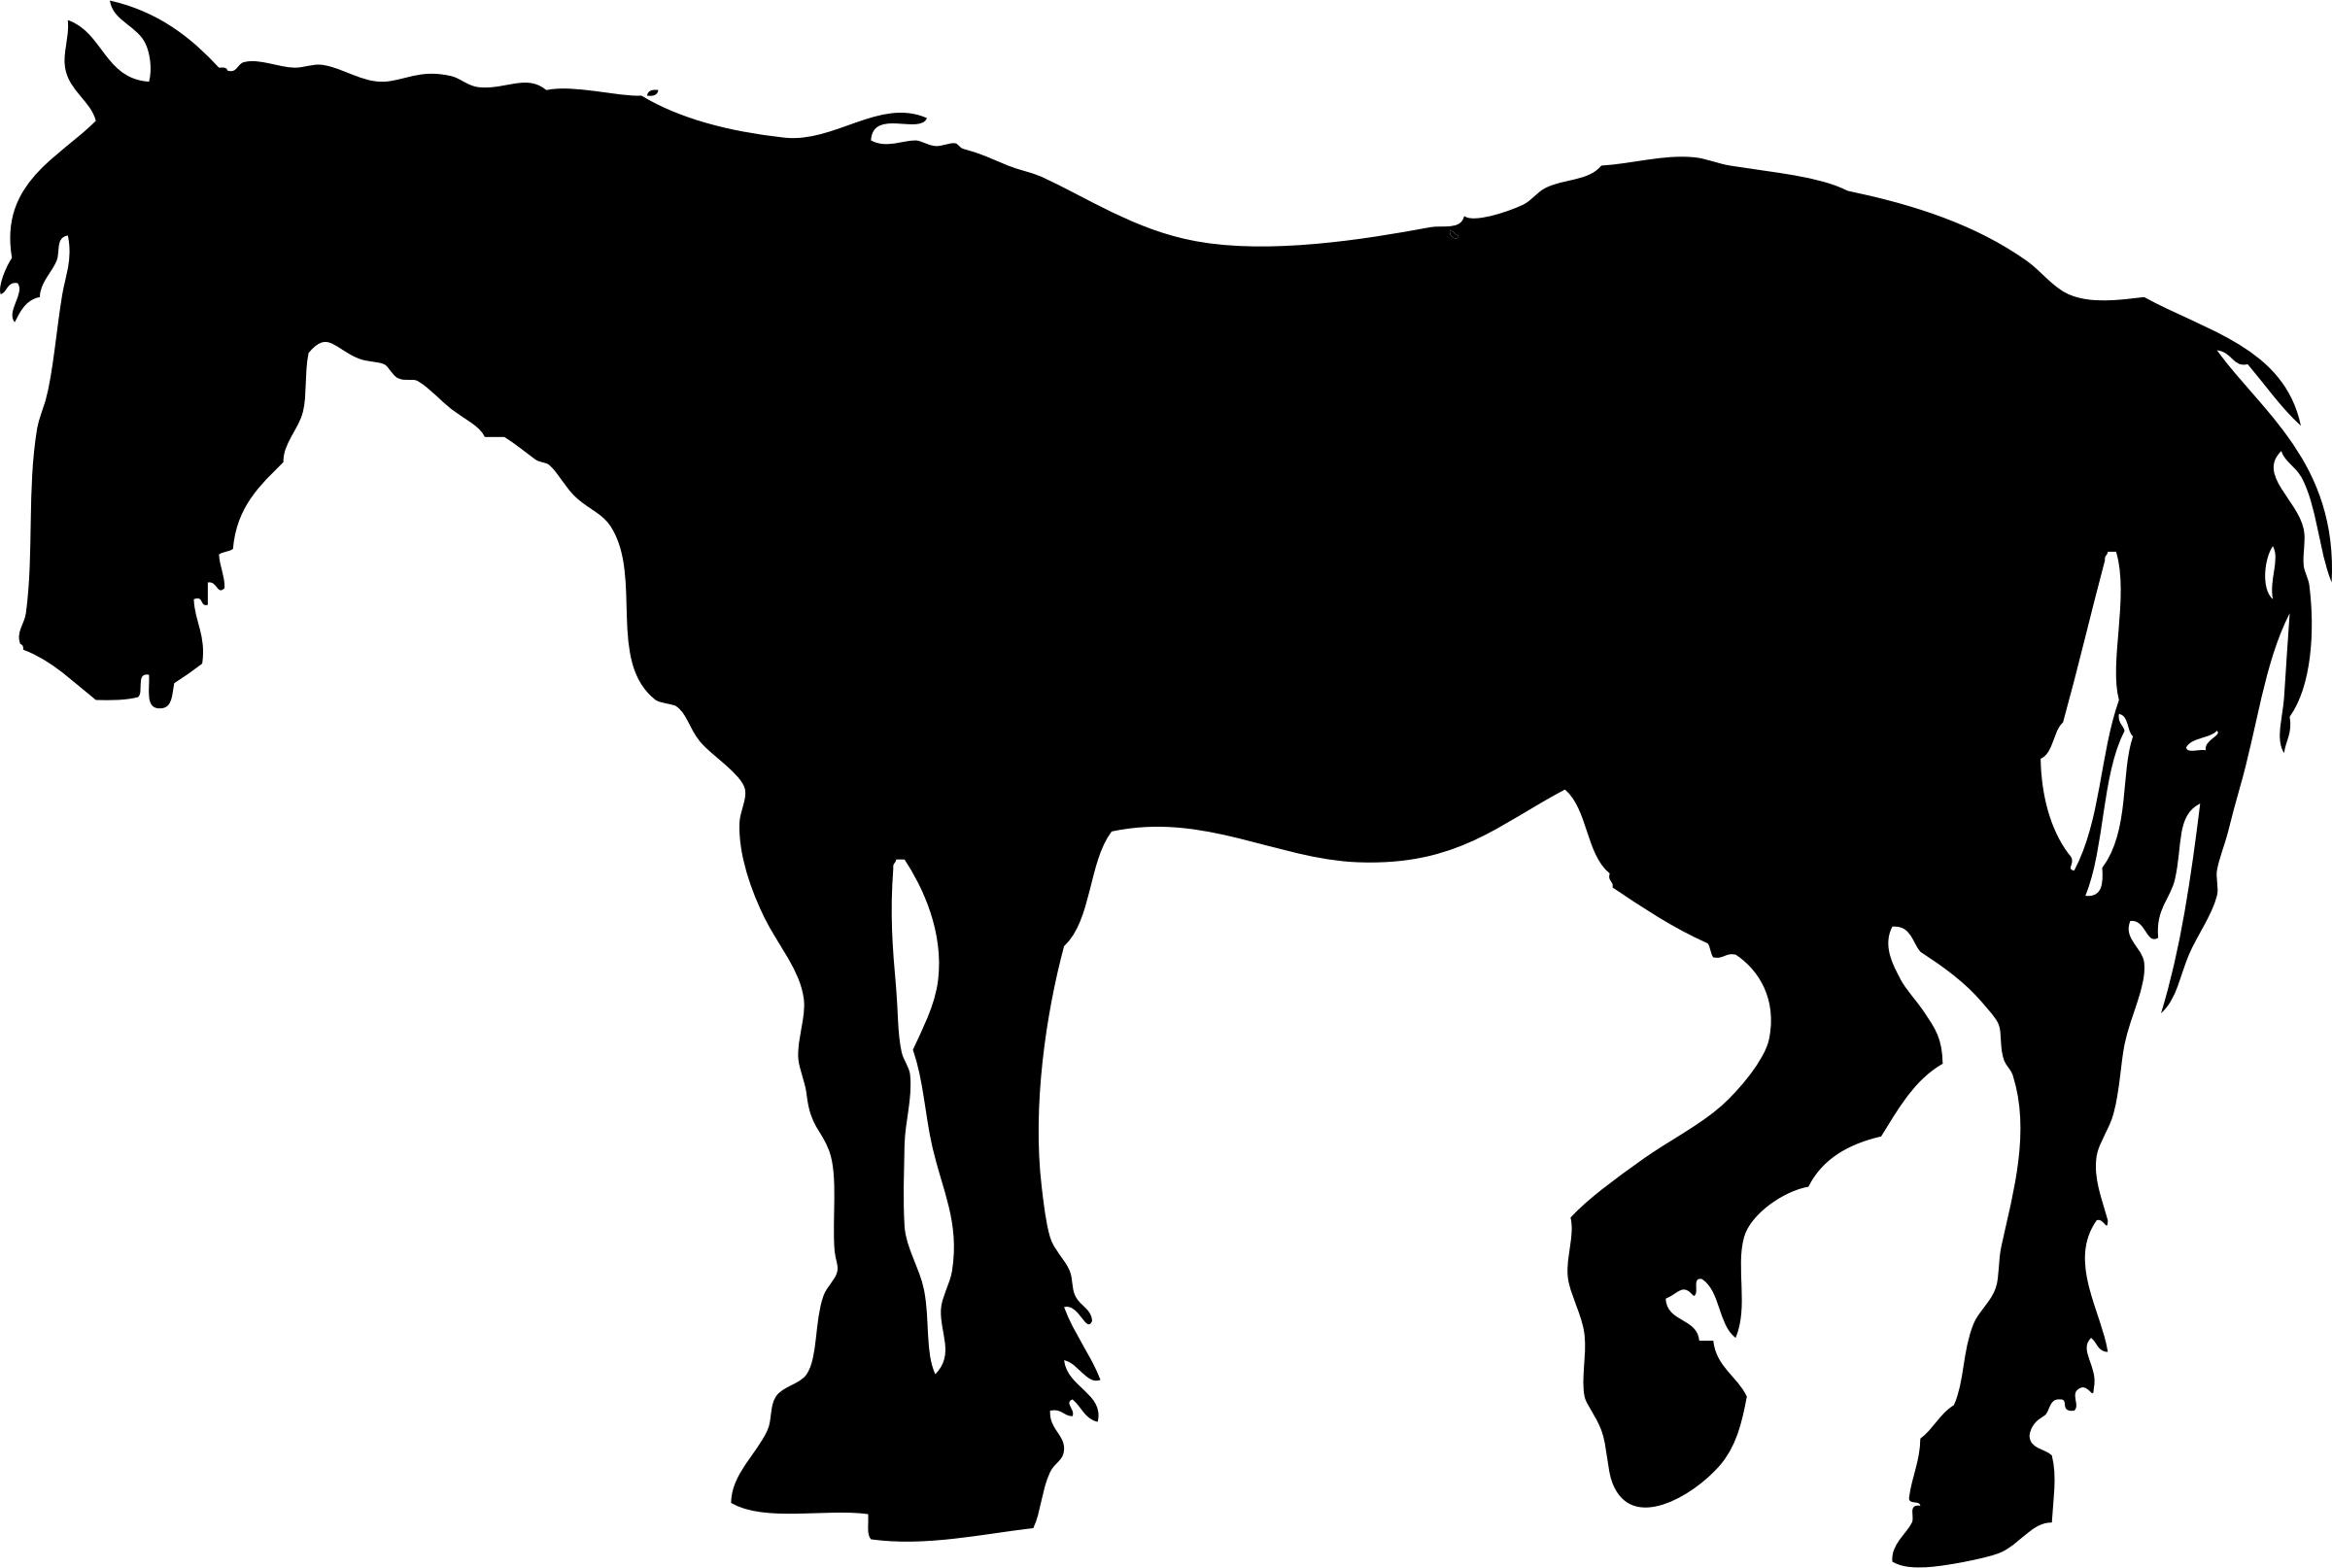 Horse silhouette png